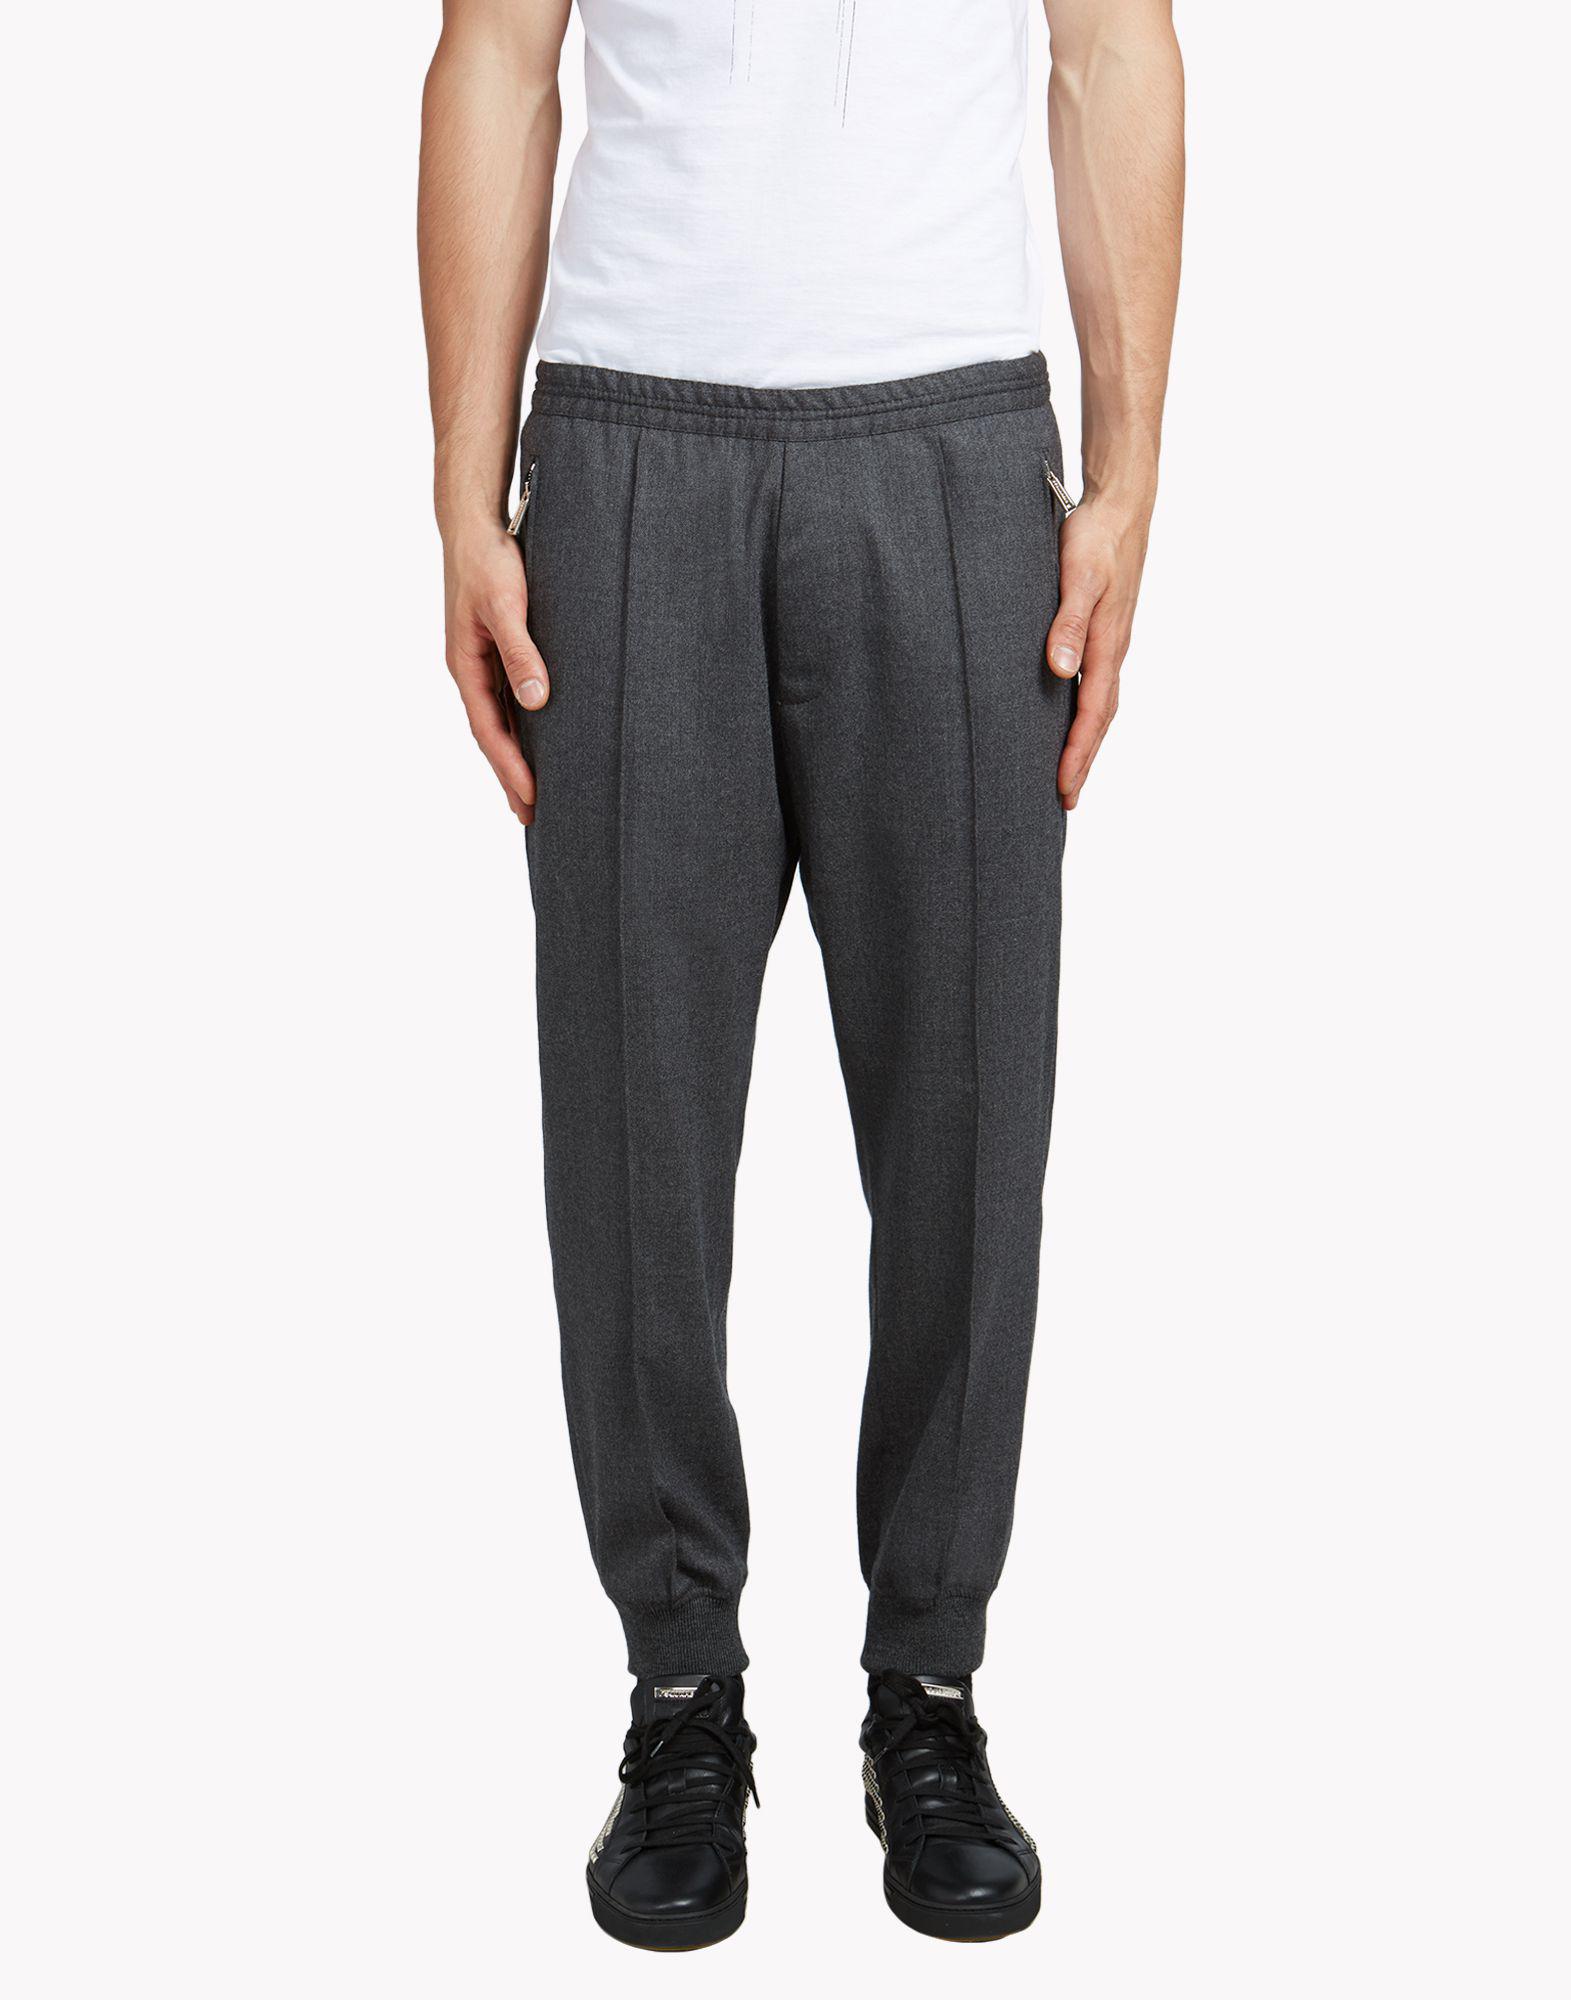 Lyst - DSquared² Jogging Pants in Gray for Men